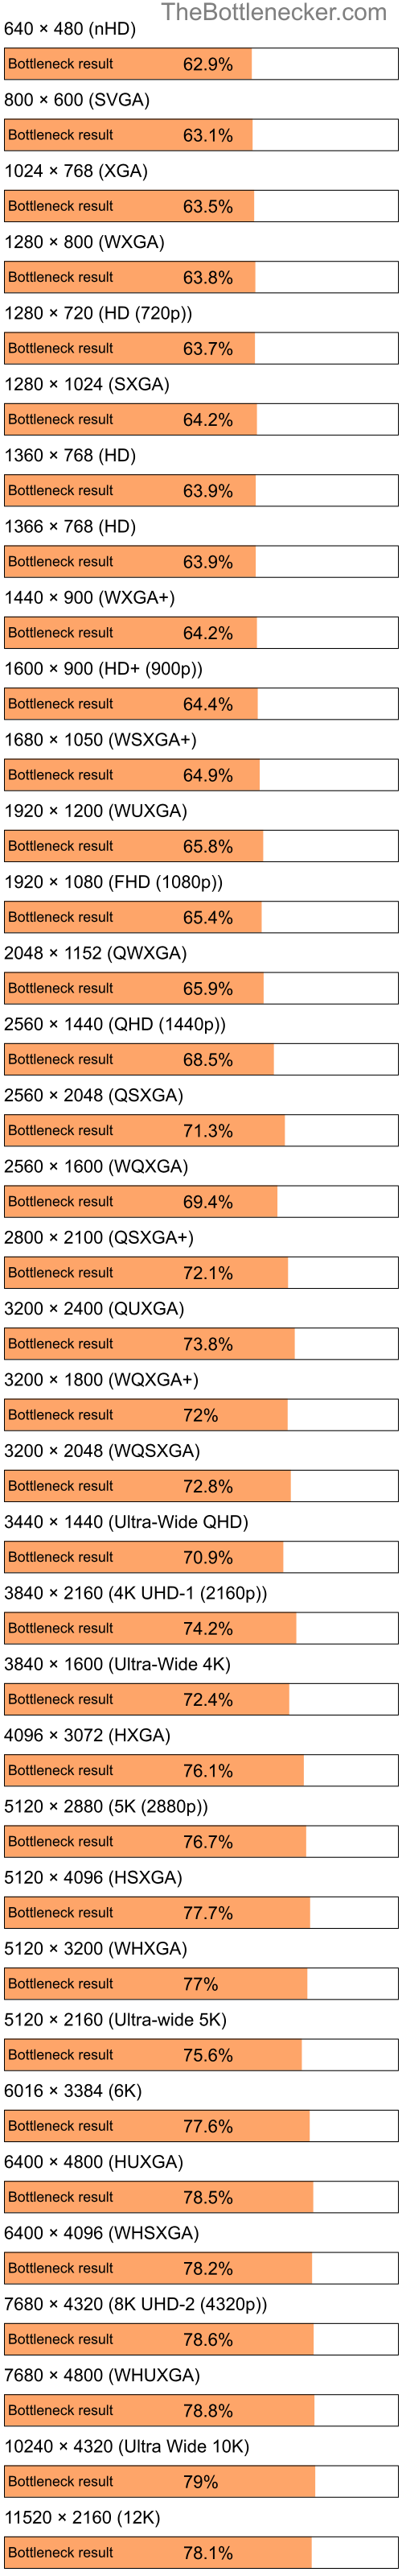 Bottleneck results by resolution for Intel Pentium 4 and NVIDIA GeForce 7300 GS in General Tasks